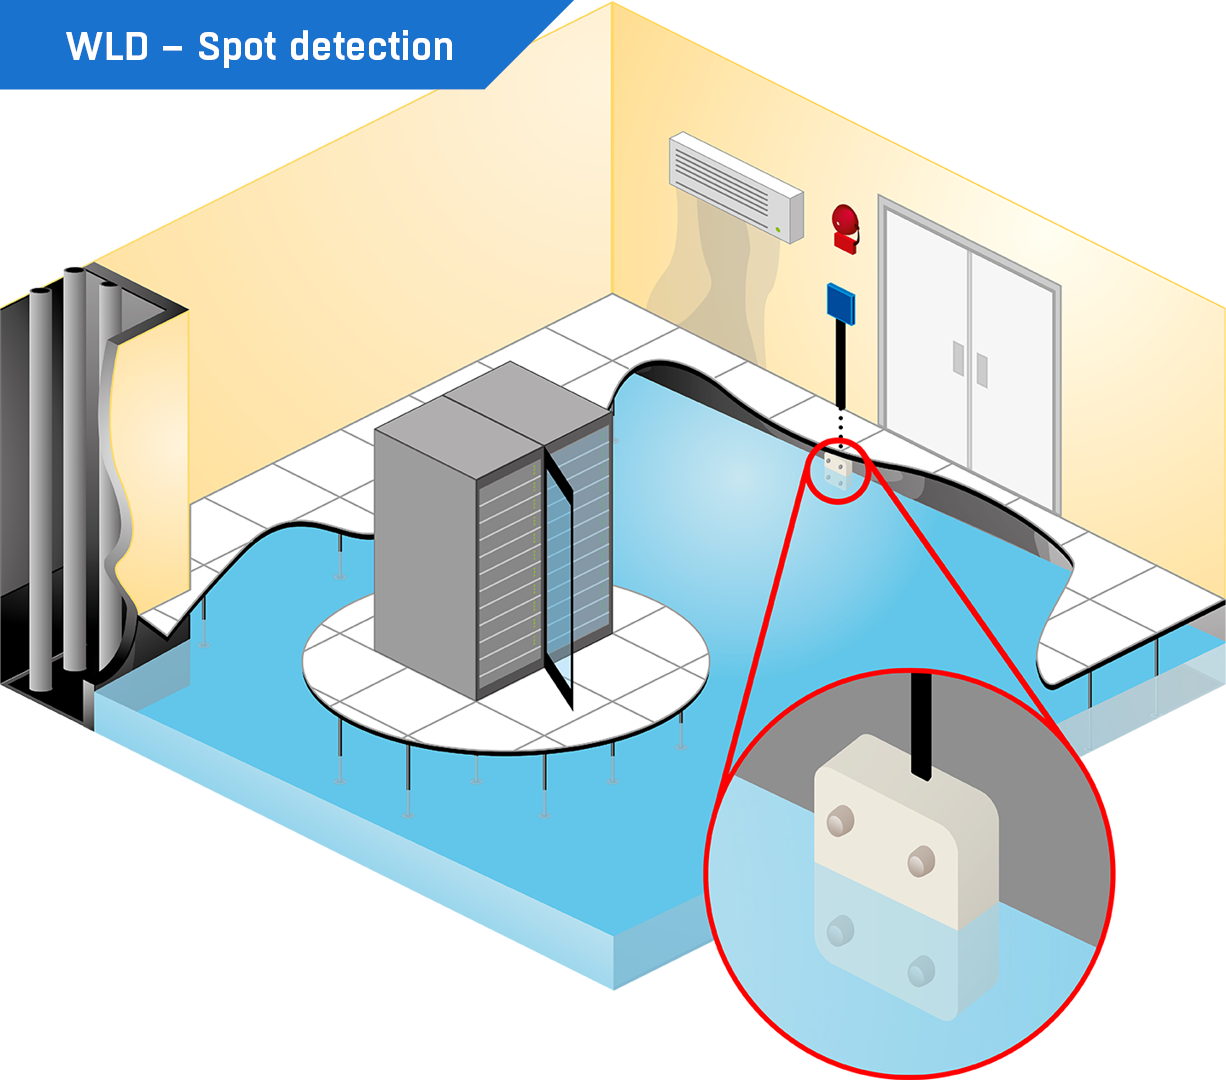 Spot detection is basicaly a swimming invitation. Detector detects water in one spot only and has to be flooded.